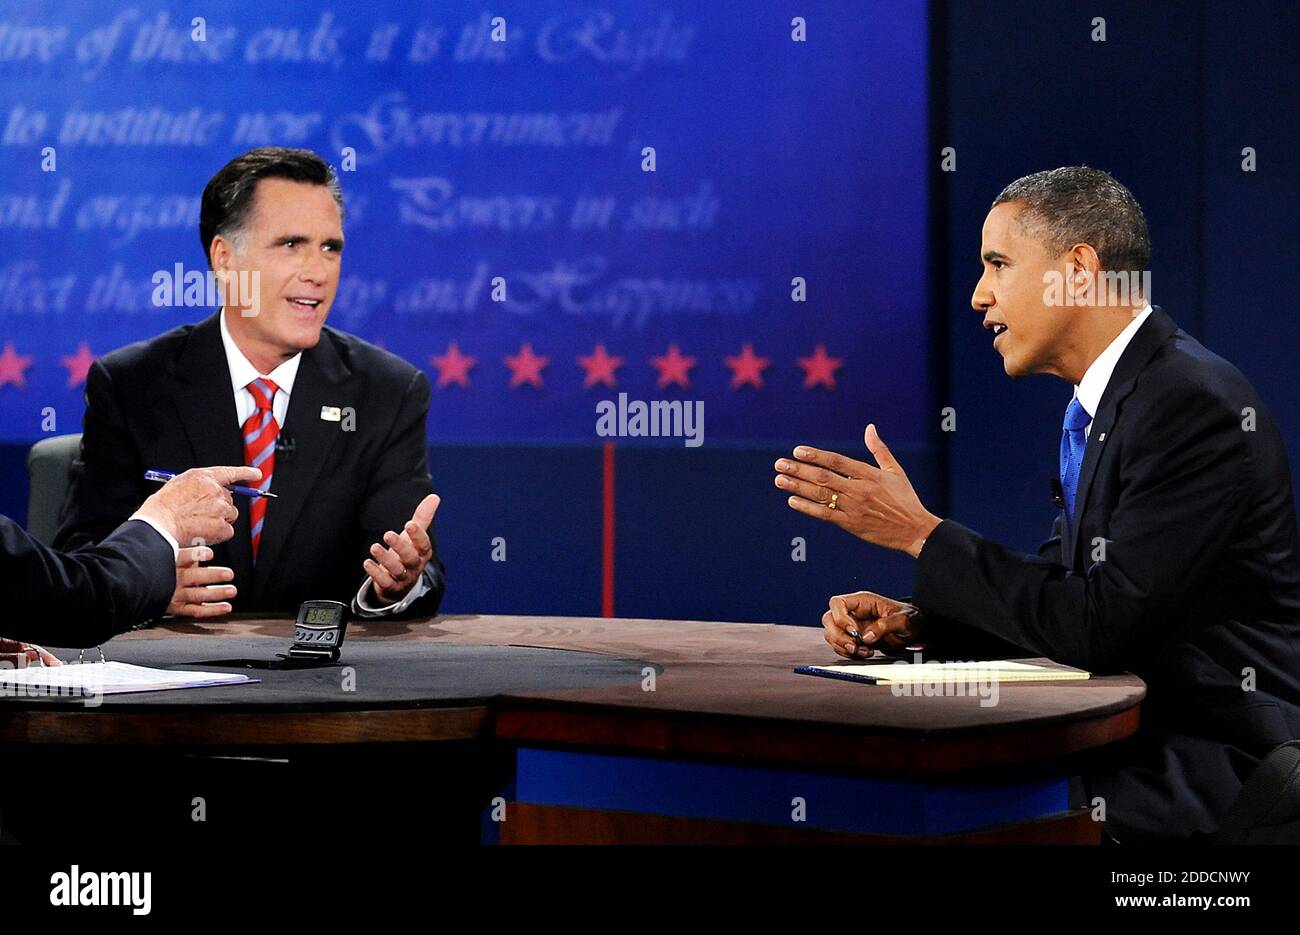 NO FILM, NO VIDEO, NO TV, NO DOCUMENTARY - President Barack Obama, right, speaks during a debate with Republican presidential candidate Mitt Romney, left, at Lynn University in Boca Raton, Florida, USA, on Monday, October 22, 2012. Bob Schieffer is the moderator. Photo by Robert Duyos/Sun Sentinel/MCT/ABACAPRESS.COM Stock Photo